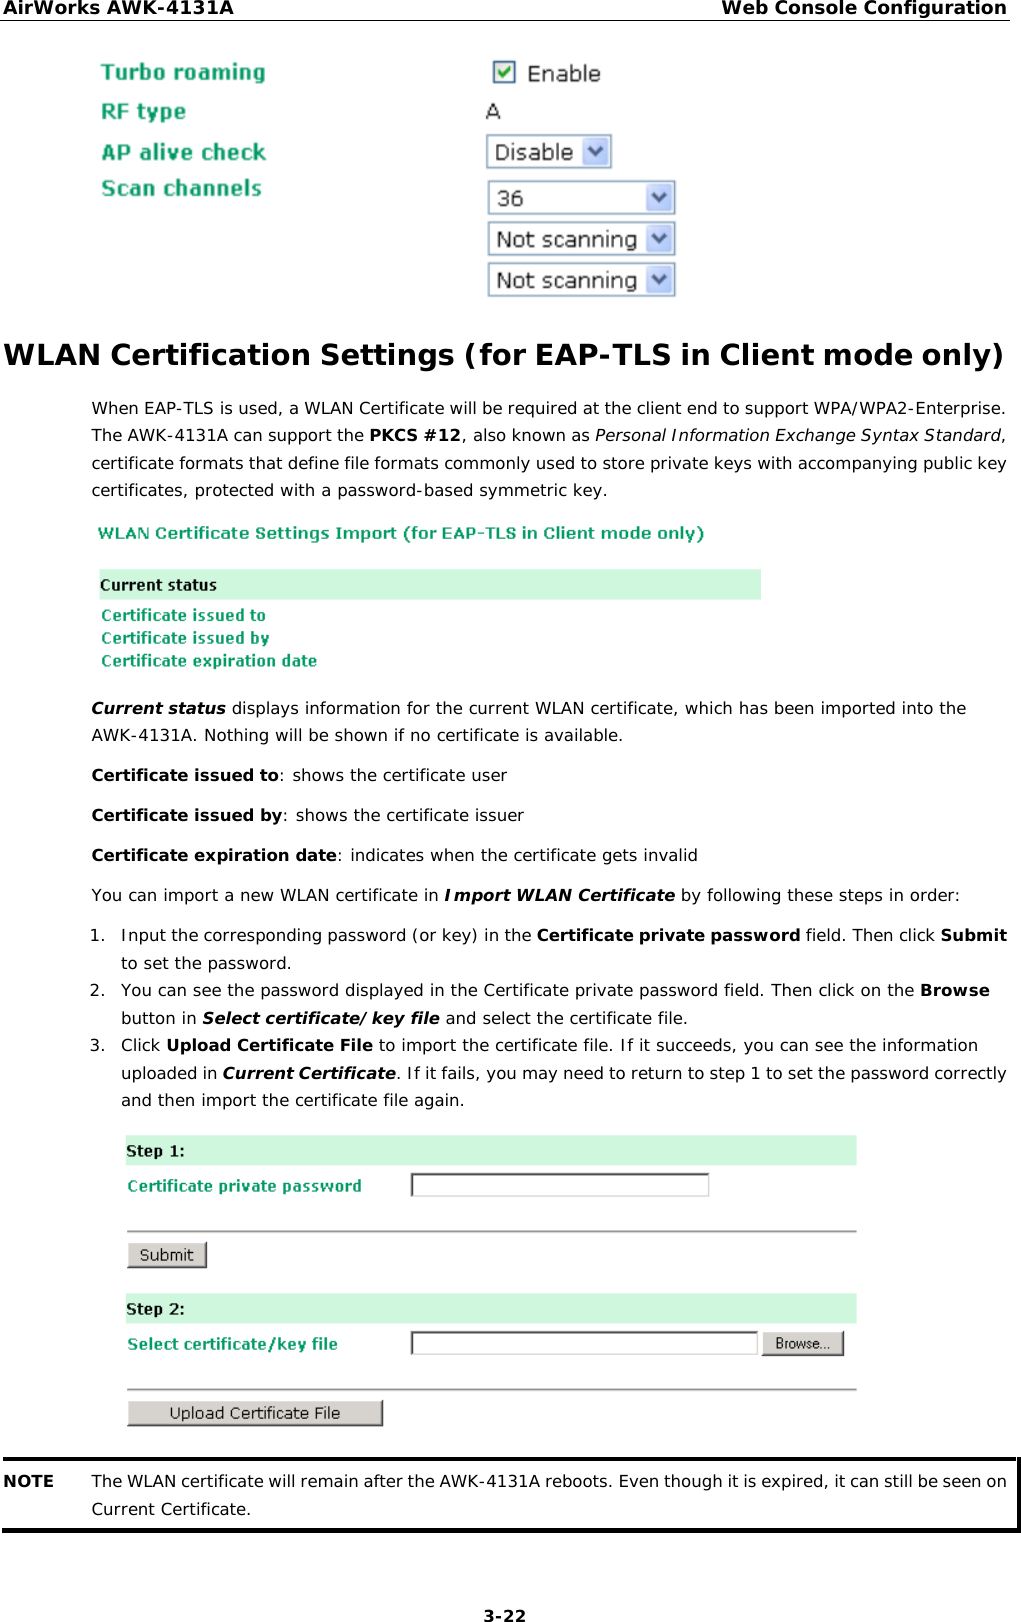 AirWorks AWK-4131A Web Console Configuration  3-22  WLAN Certification Settings (for EAP-TLS in Client mode only) When EAP-TLS is used, a WLAN Certificate will be required at the client end to support WPA/WPA2-Enterprise. The AWK-4131A can support the PKCS #12, also known as Personal Information Exchange Syntax Standard, certificate formats that define file formats commonly used to store private keys with accompanying public key certificates, protected with a password-based symmetric key.  Current status displays information for the current WLAN certificate, which has been imported into the AWK-4131A. Nothing will be shown if no certificate is available. Certificate issued to: shows the certificate user Certificate issued by: shows the certificate issuer Certificate expiration date: indicates when the certificate gets invalid You can import a new WLAN certificate in Import WLAN Certificate by following these steps in order: 1. Input the corresponding password (or key) in the Certificate private password field. Then click Submit to set the password. 2. You can see the password displayed in the Certificate private password field. Then click on the Browse button in Select certificate/key file and select the certificate file. 3. Click Upload Certificate File to import the certificate file. If it succeeds, you can see the information uploaded in Current Certificate. If it fails, you may need to return to step 1 to set the password correctly and then import the certificate file again.  NOTE The WLAN certificate will remain after the AWK-4131A reboots. Even though it is expired, it can still be seen on Current Certificate.  